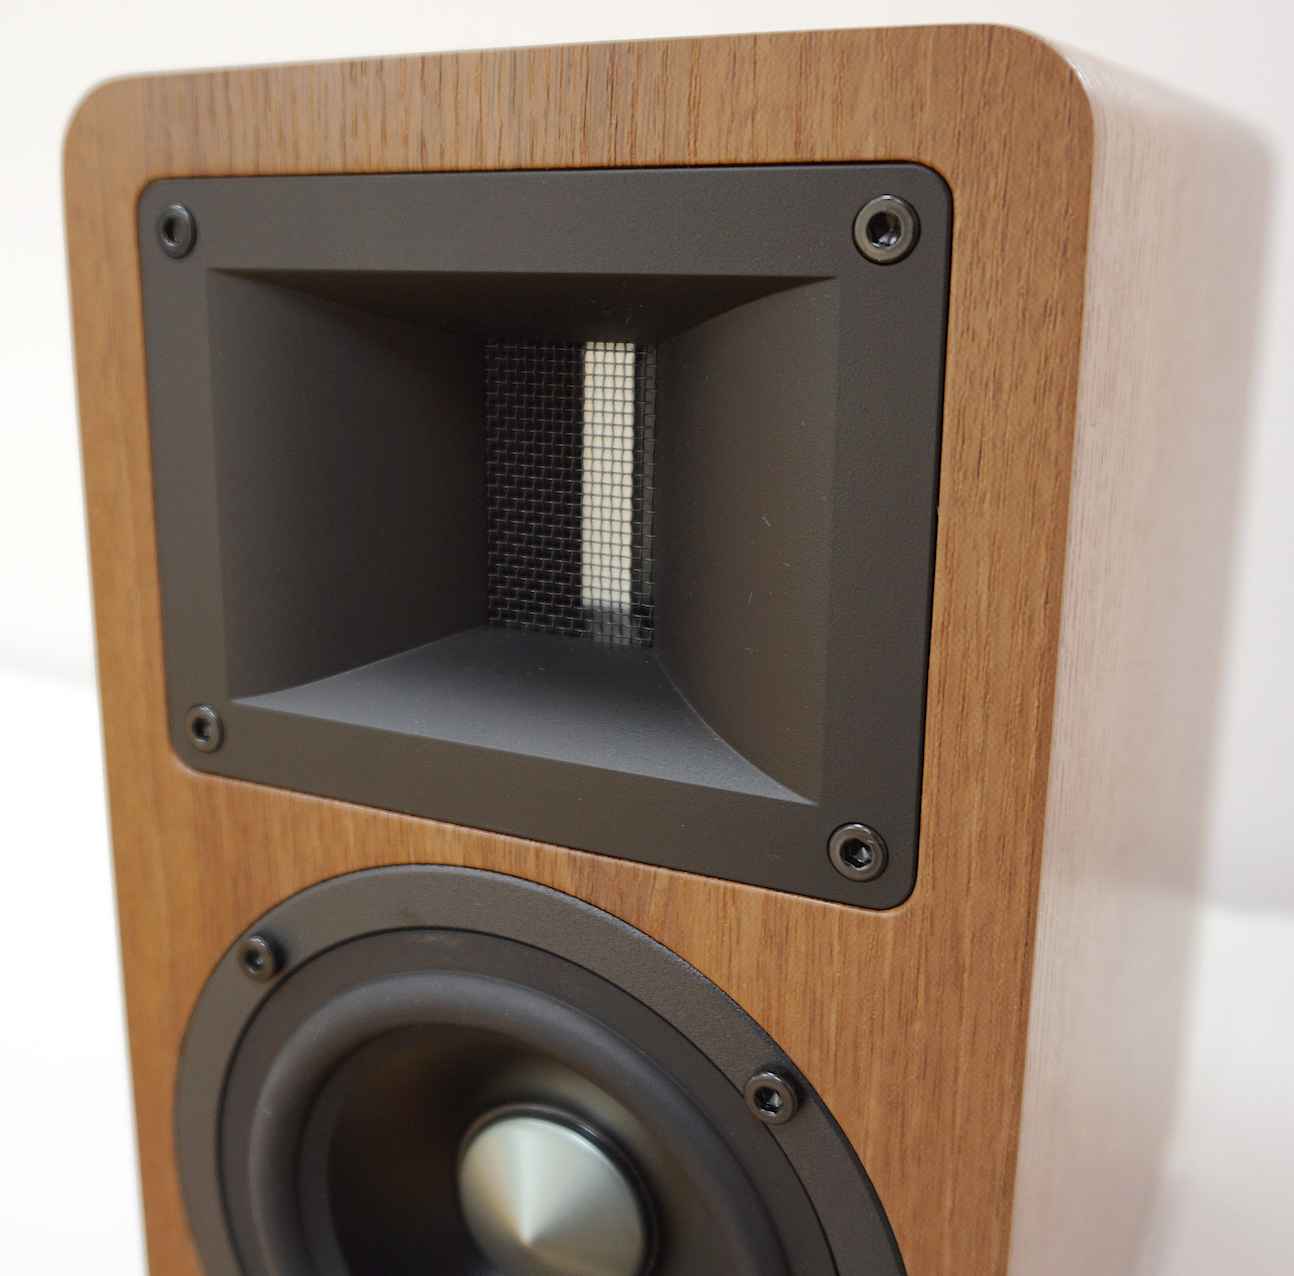 A80 Powered Speakers From Airpulse - The Audiophile Man